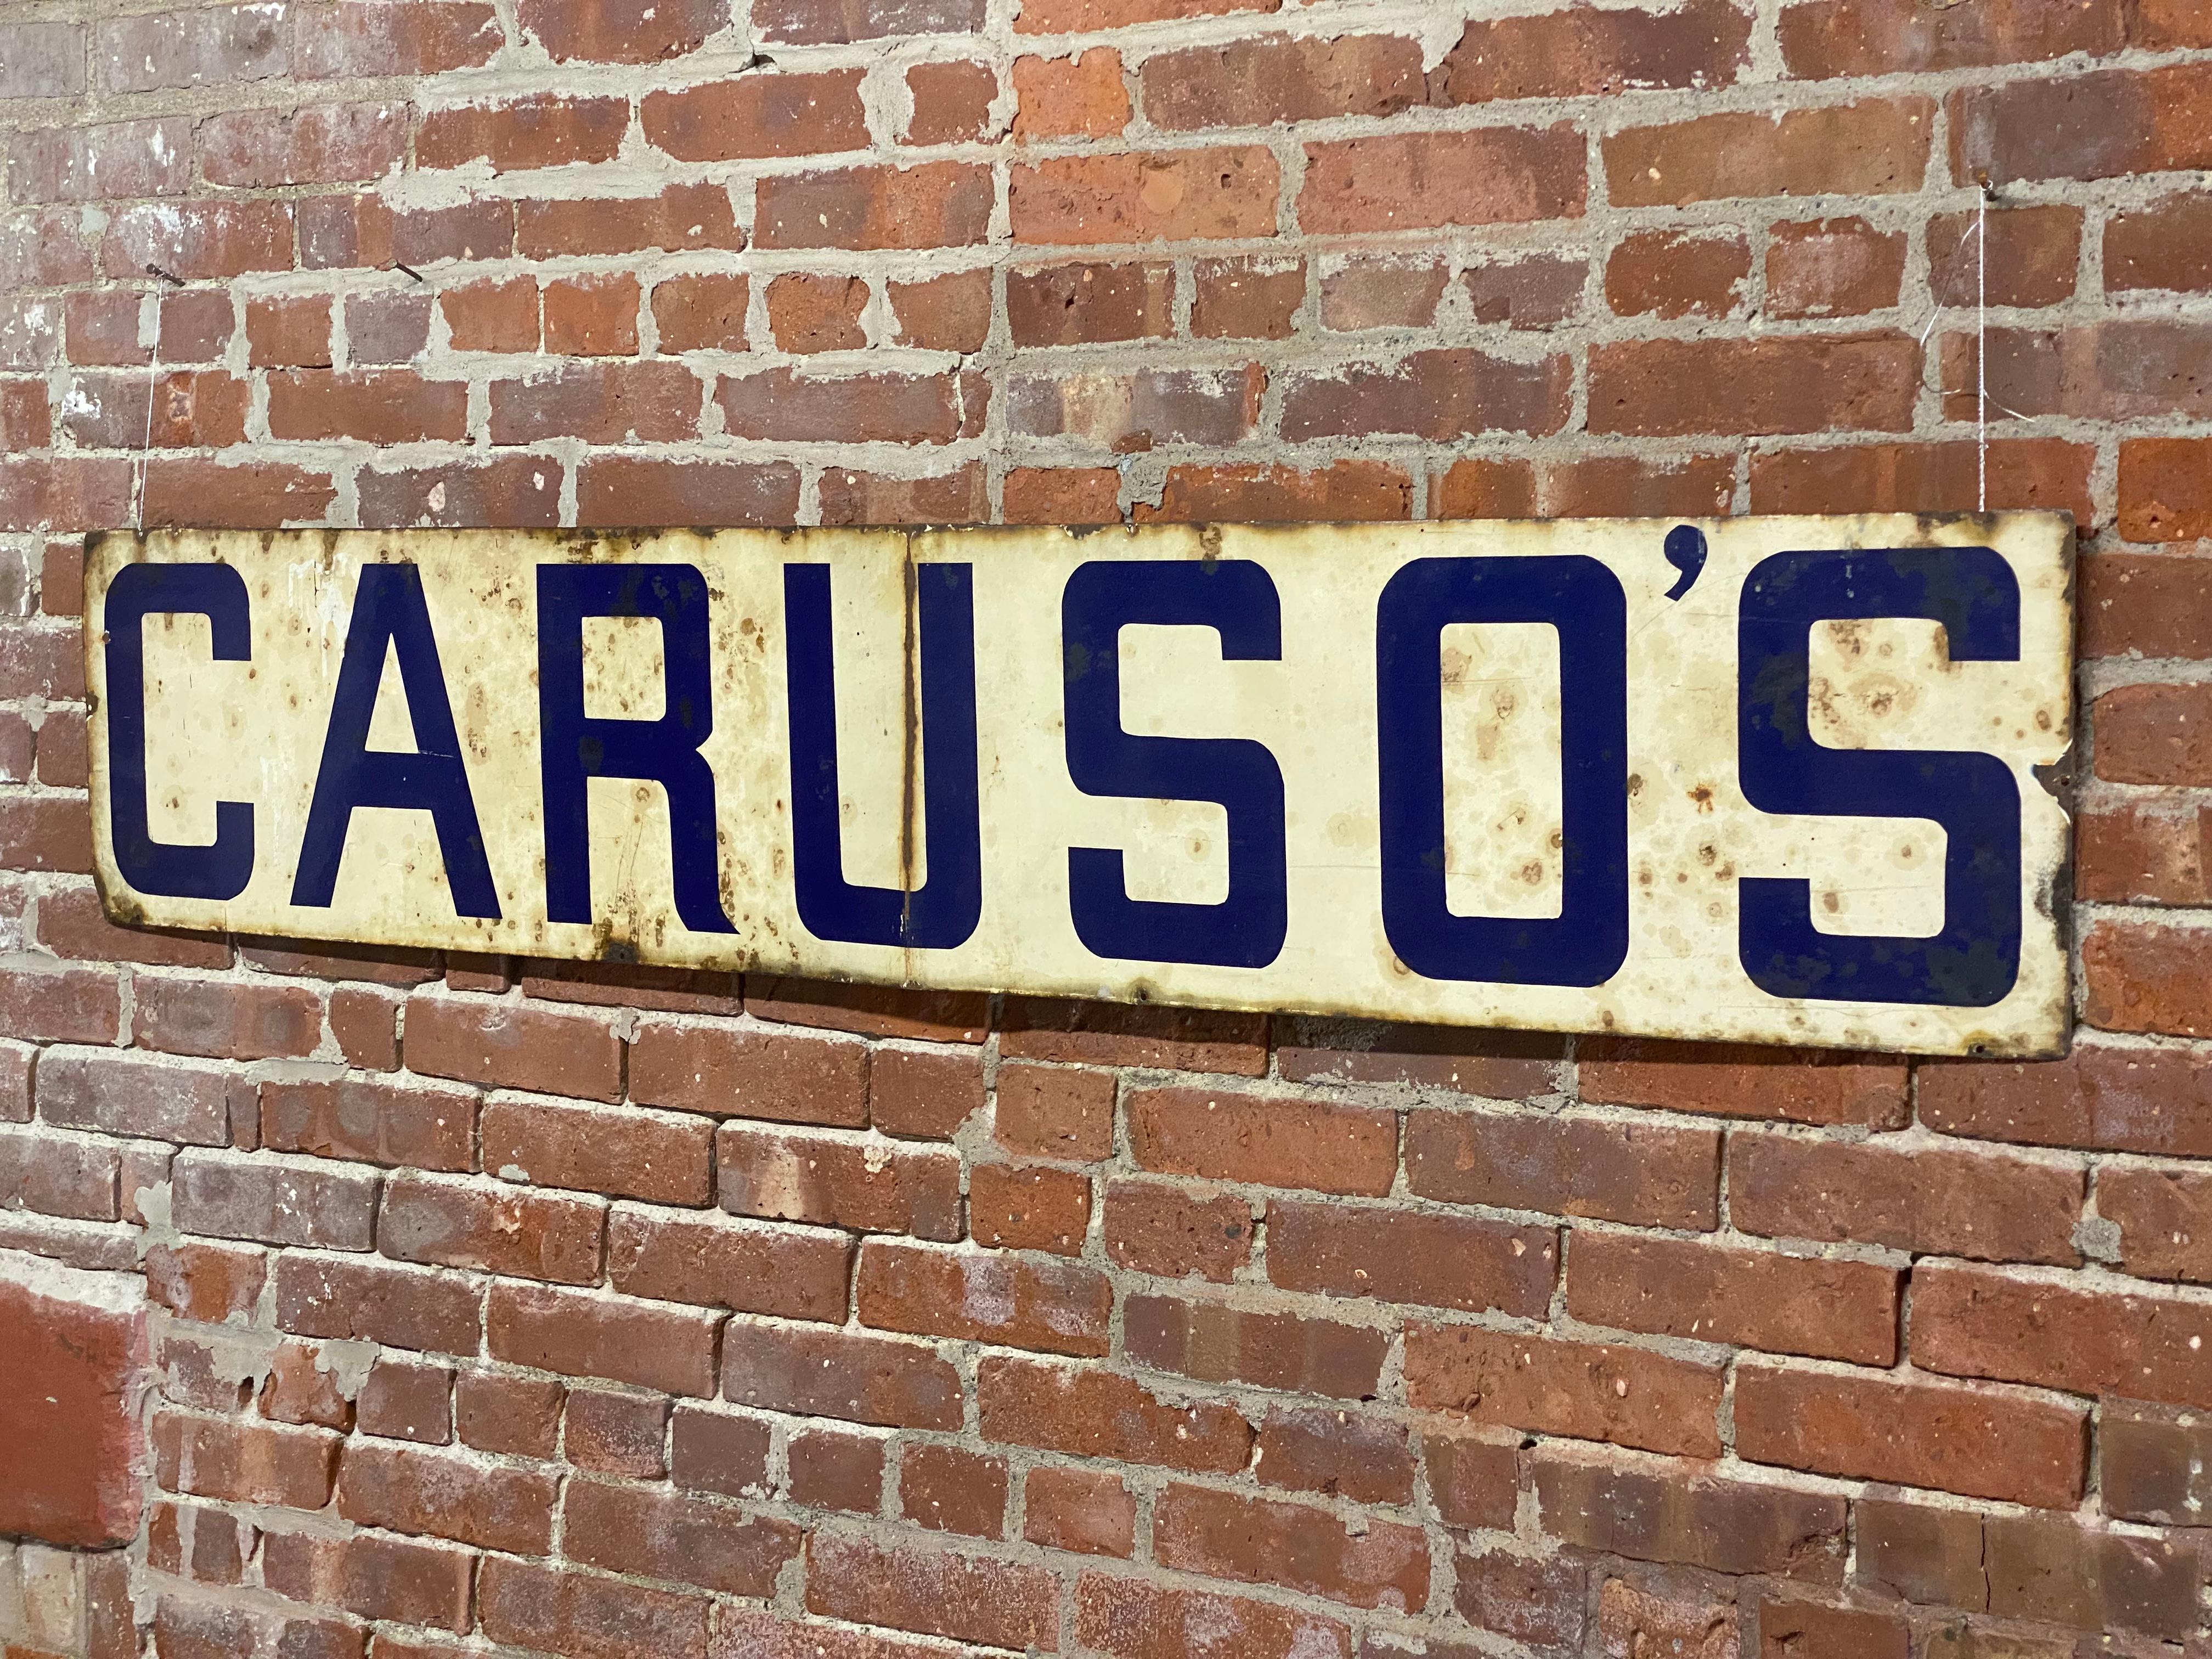 Caruso's cobalt blue and white enamel wall mounted sign. From the restaurant in Poughkeepsie, NY's Little Italy neighborhood. Circa 1930-40. Originally mounted on the side of the building's brick facade. Baked porcelain enamel on metal. Good to fair